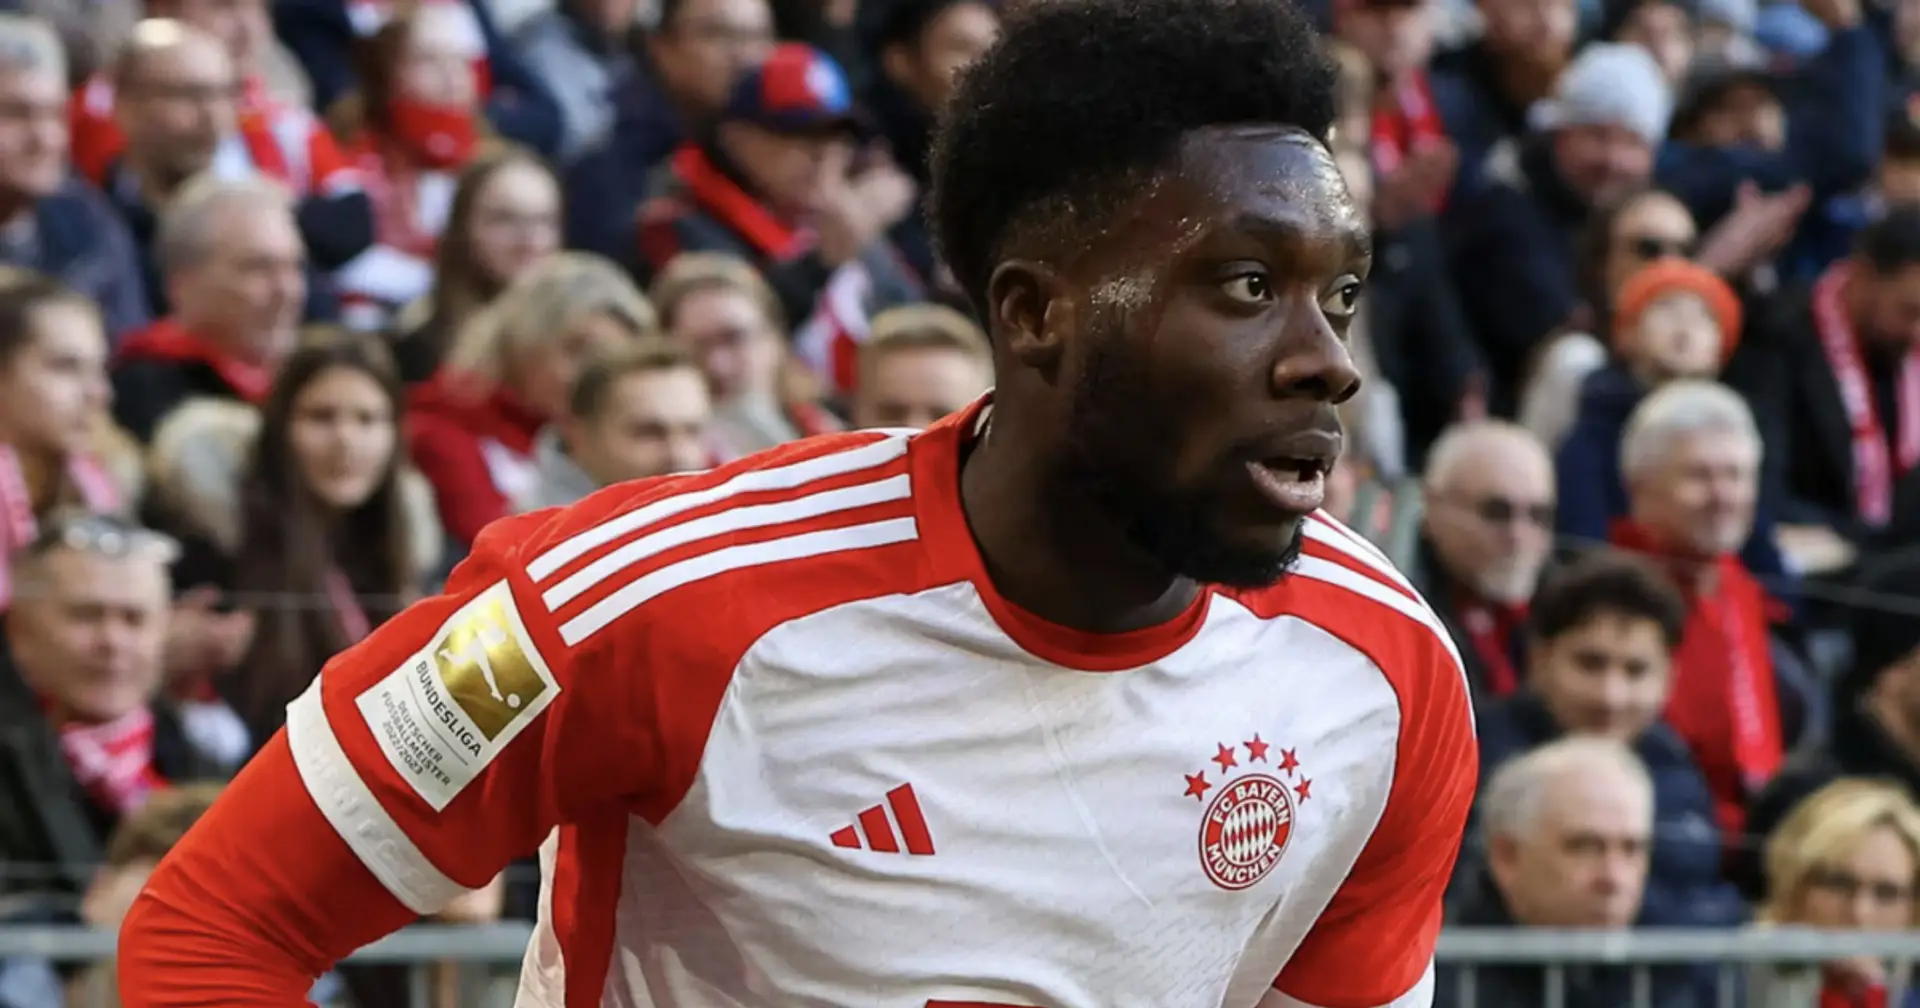 Barcelona reportedly aim to hi-jack Real Madrid's Alphonso Davies move